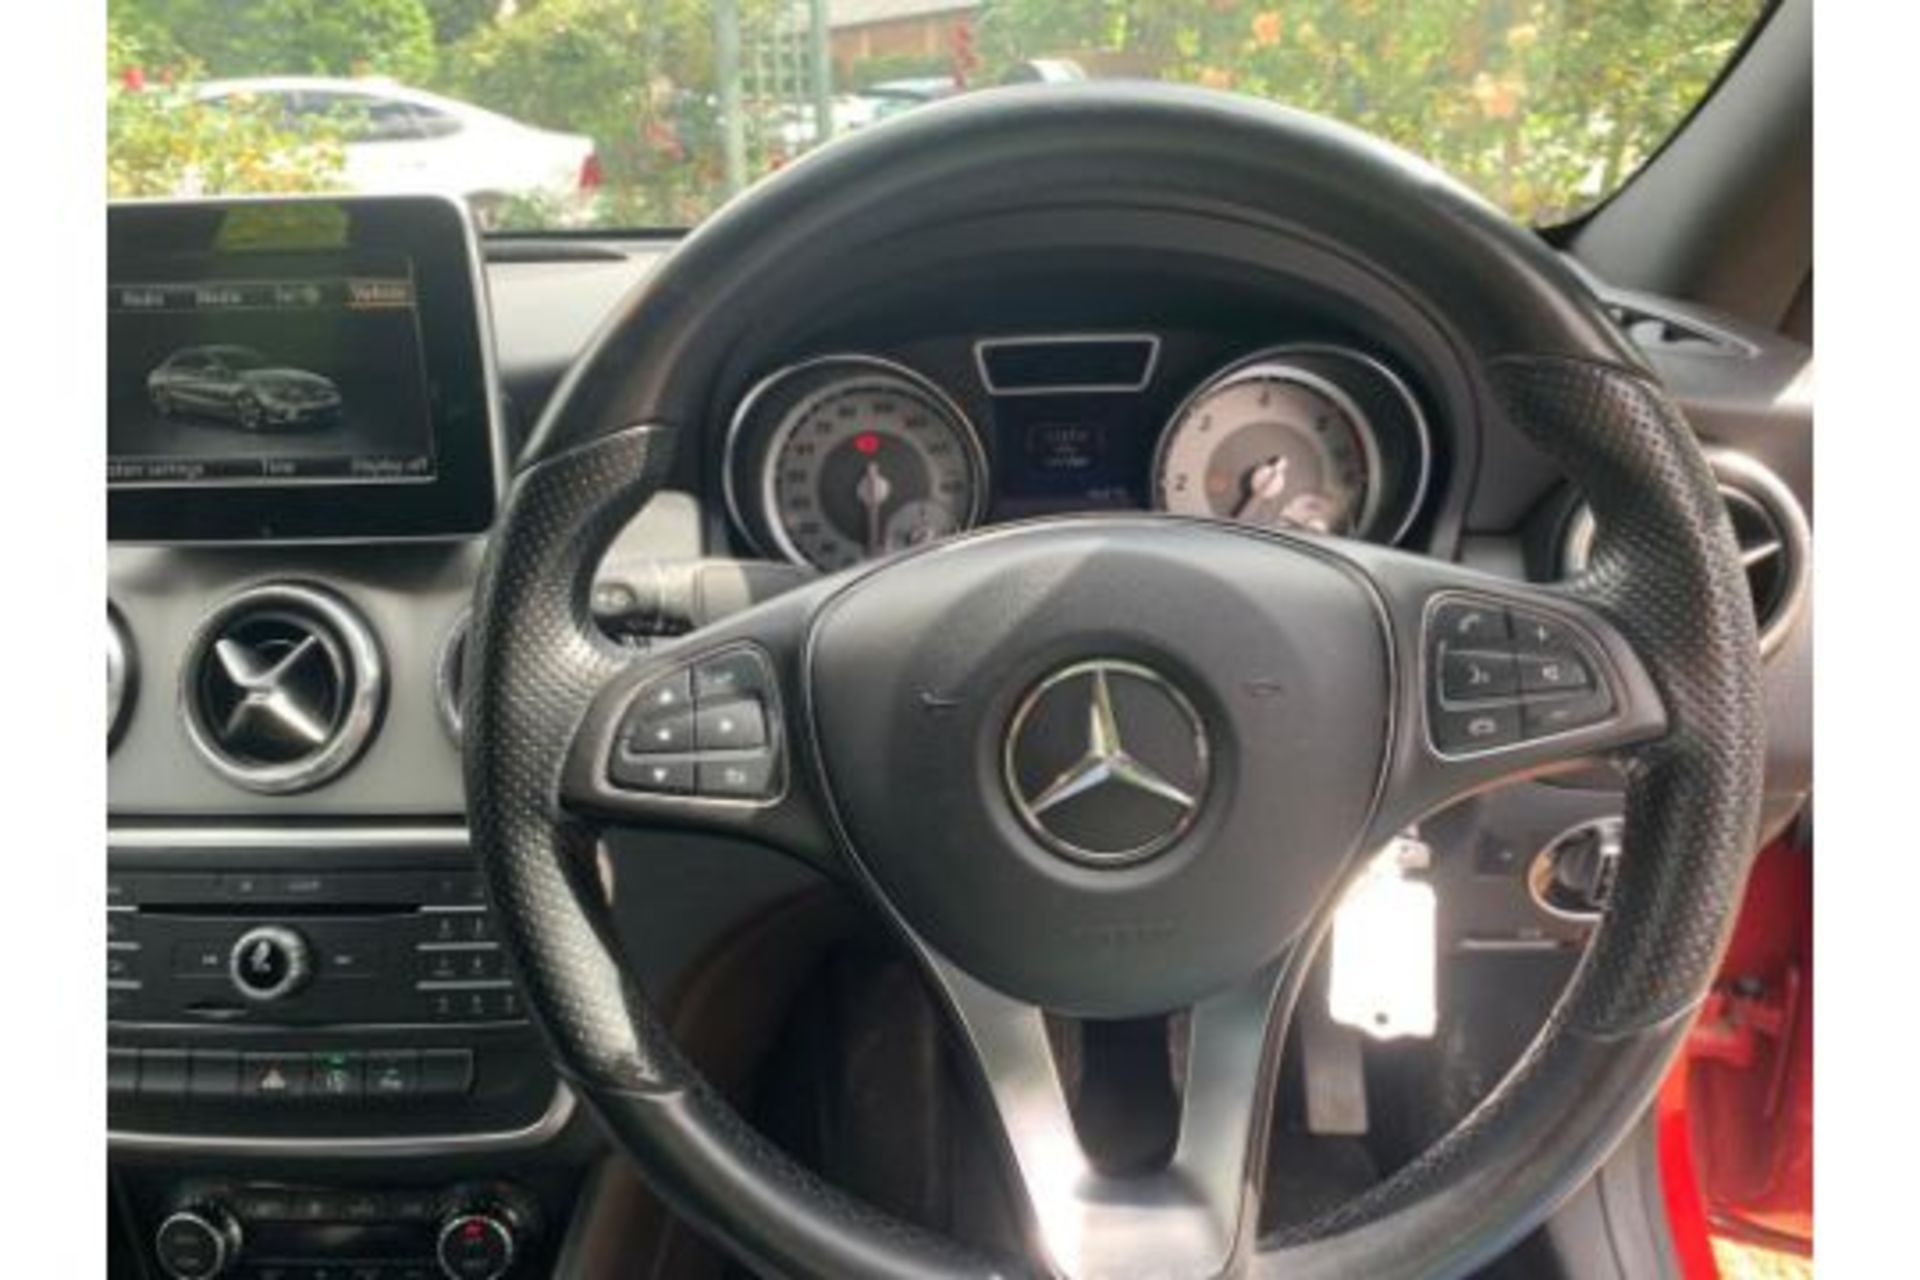 Mercedes Benz CLA 200 CDI "Sport" Edition - 2016 Model - 1 Owner From New - Leather - HUGE SPEC!! - Image 15 of 25